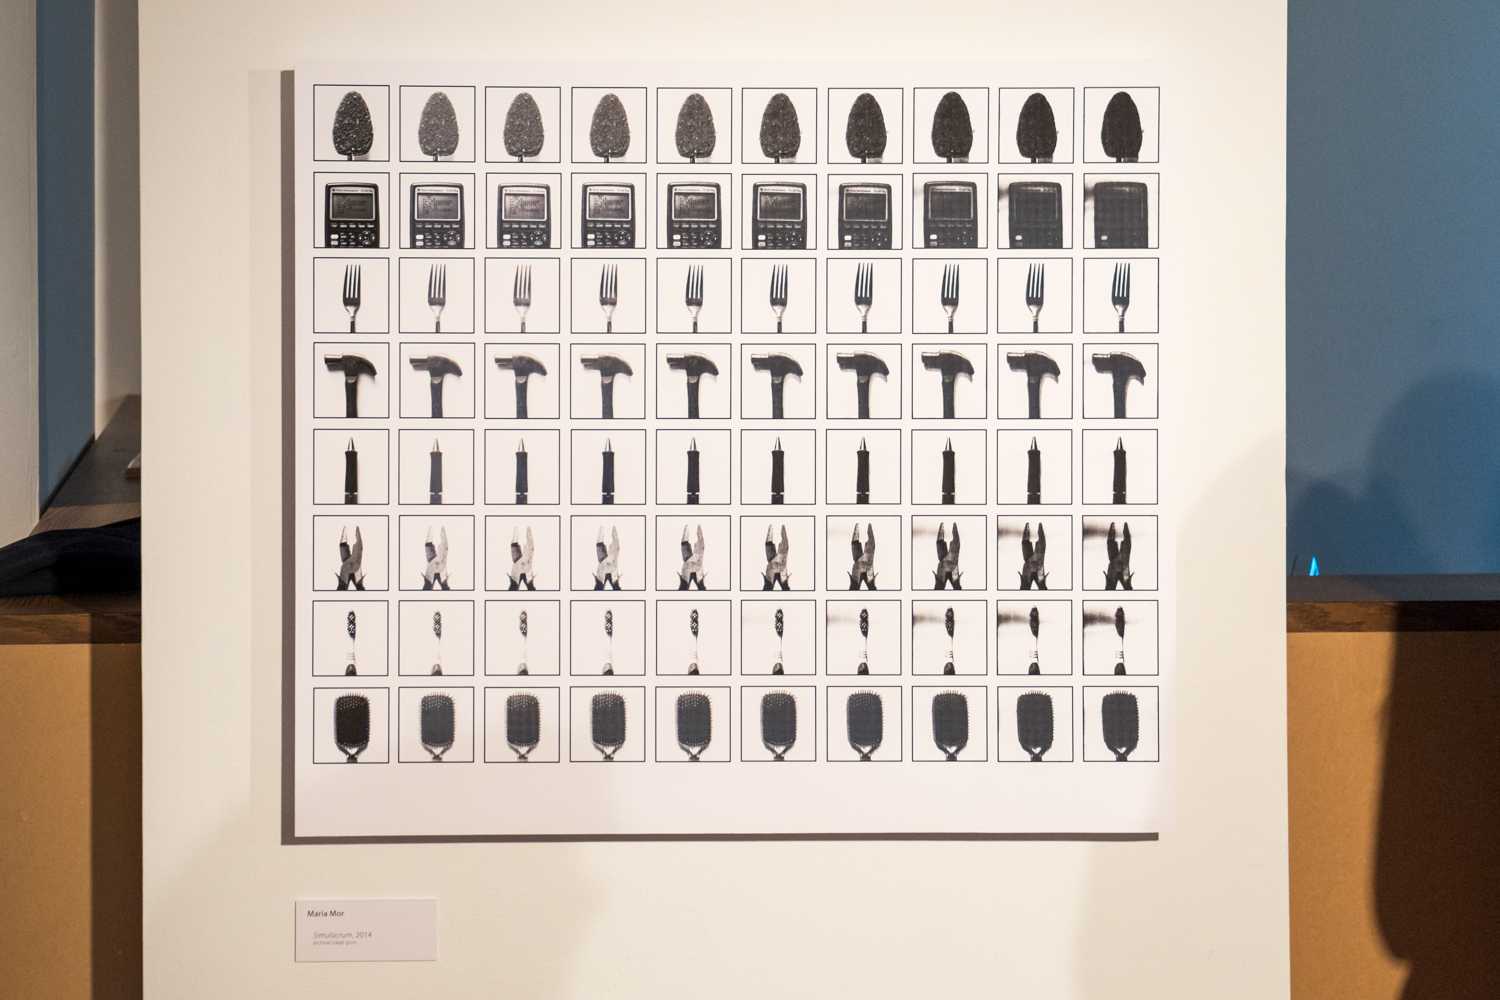 Maria Mor’s piece in the exhibit is titled “Simulacrum."  Mohammed F Emran | Web Editor